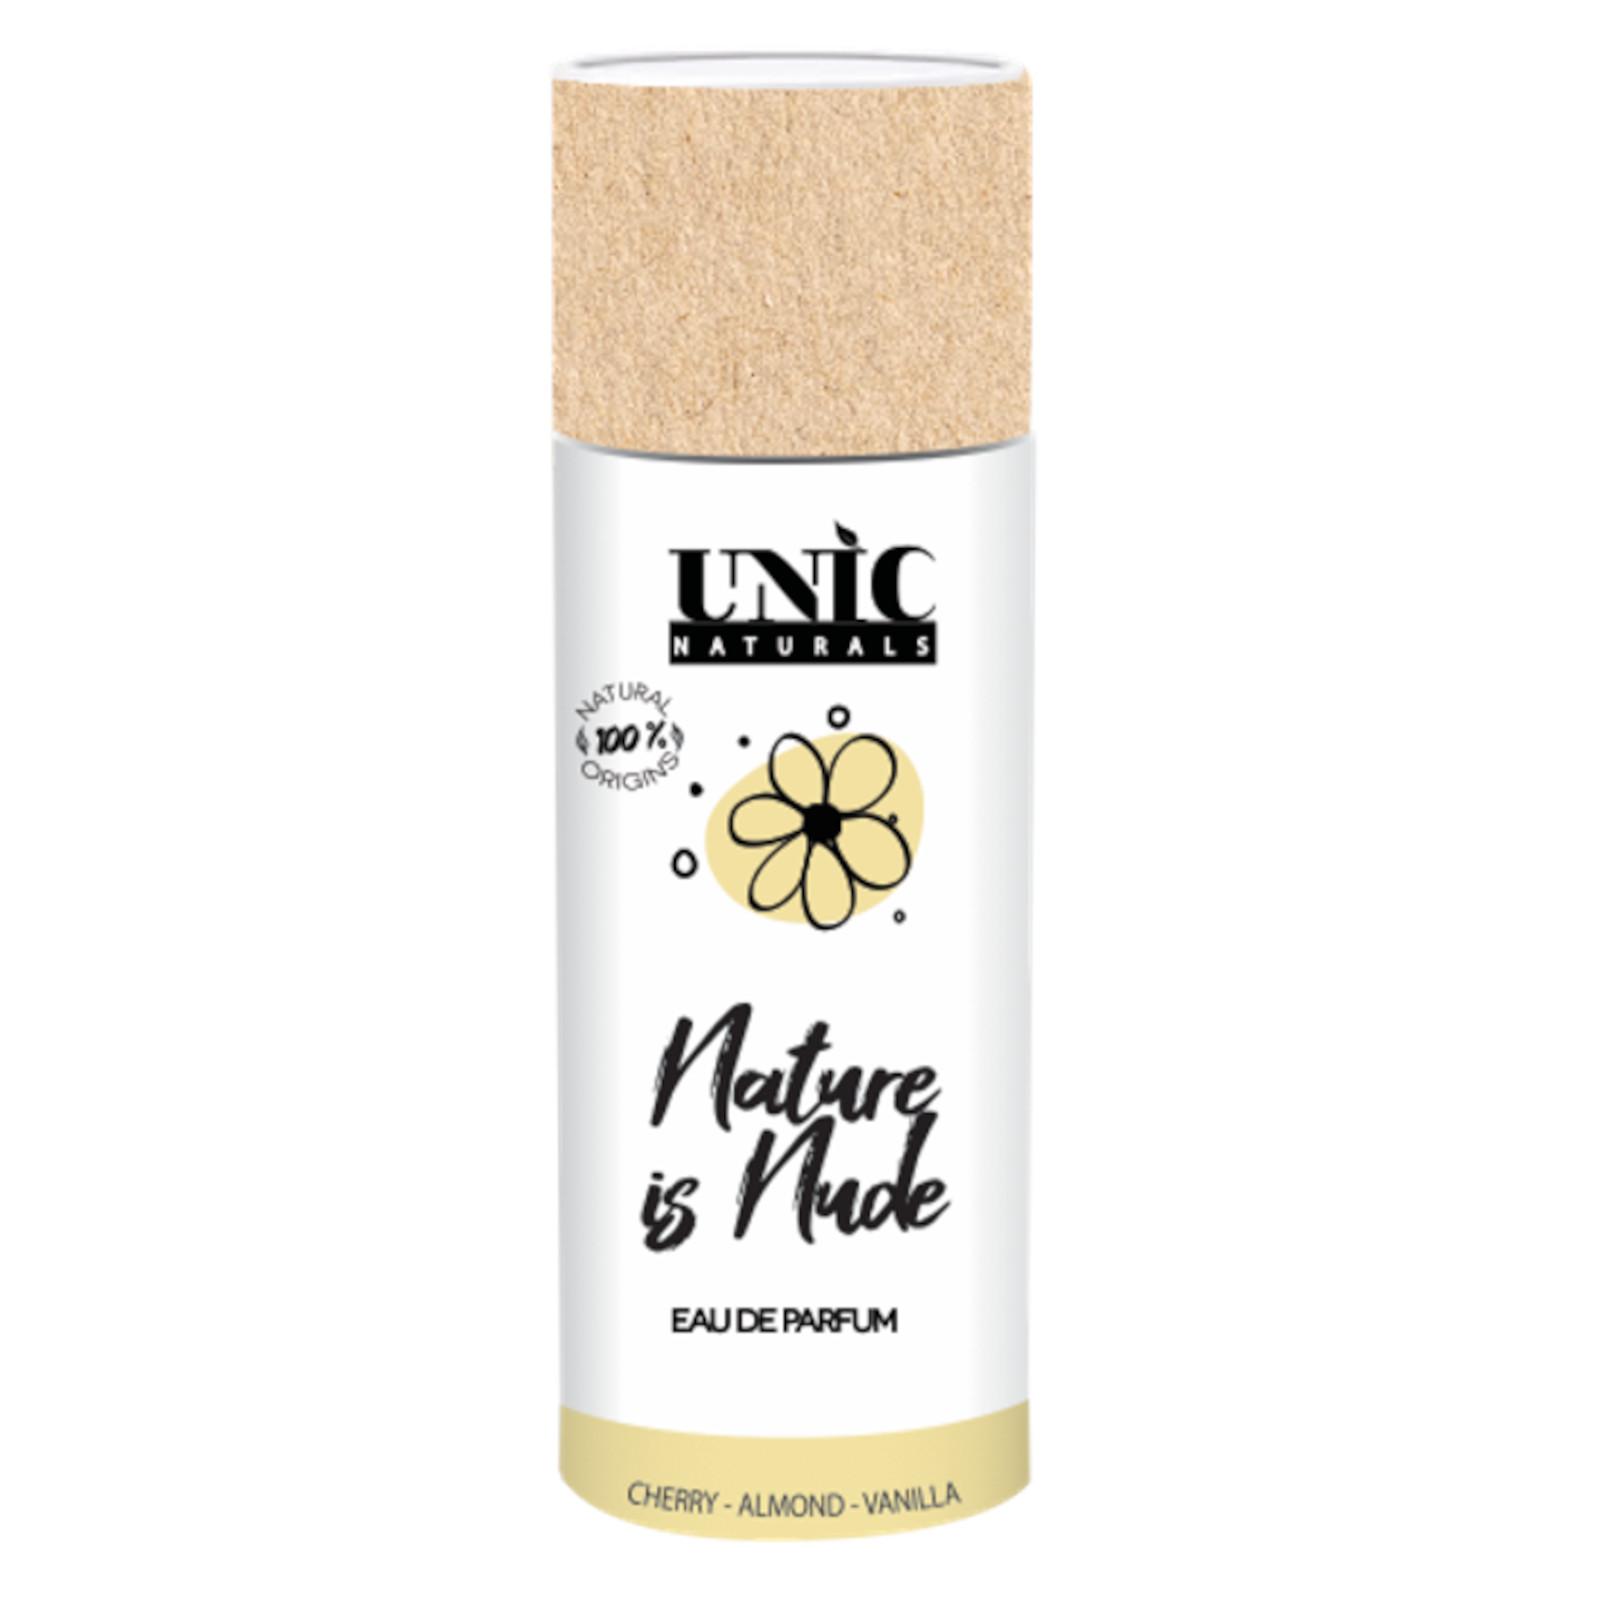 UNIC NATURALS Nature Is Nude Edp 30 ml